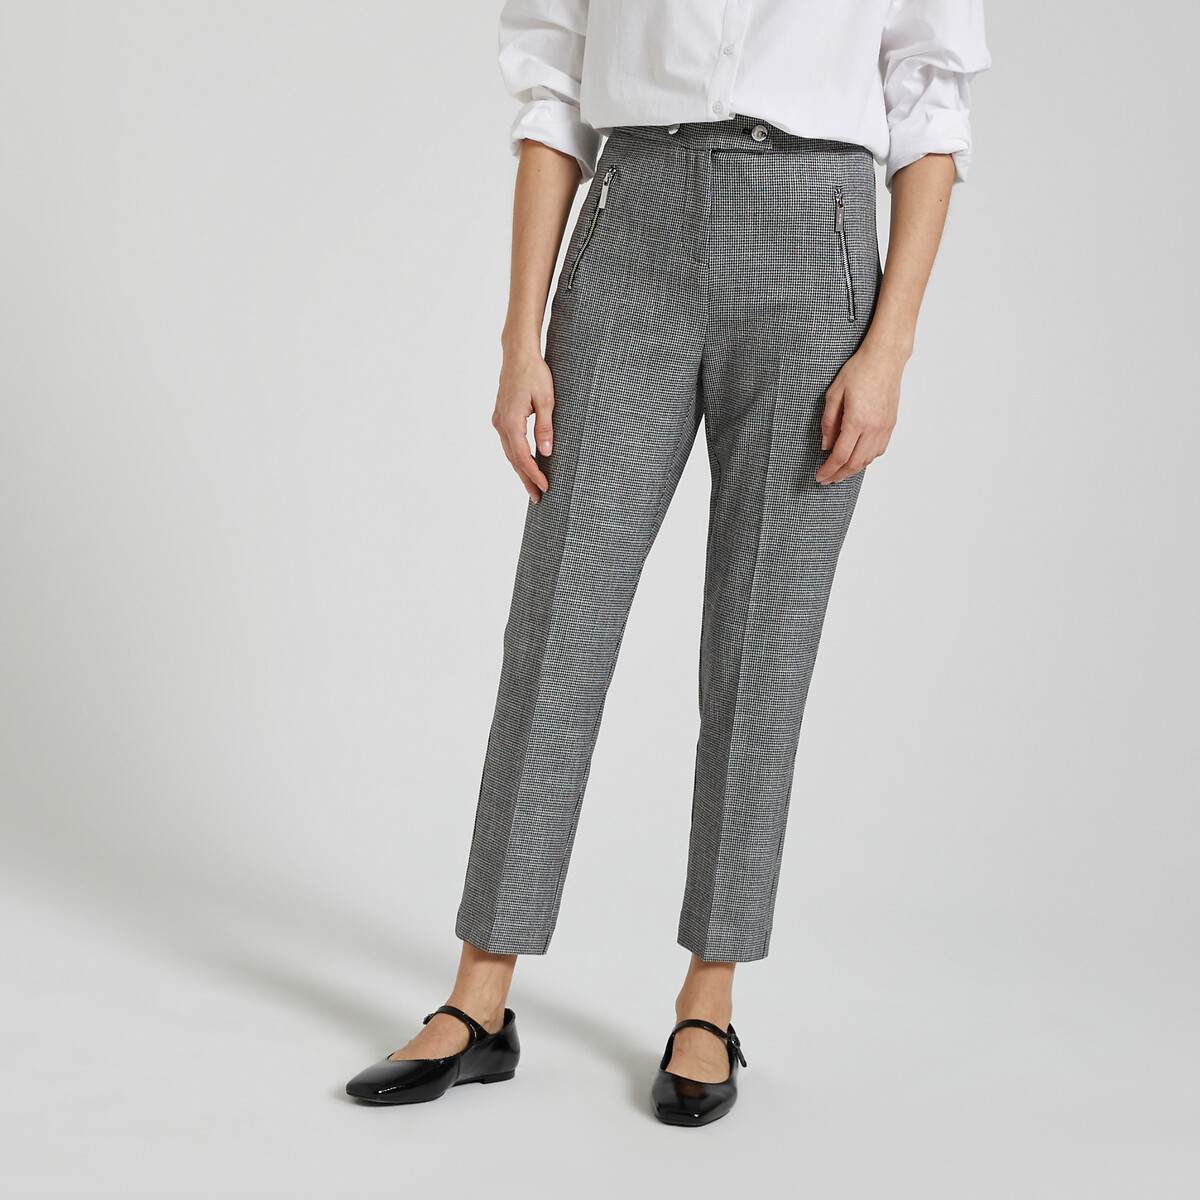 Image of Houndstooth Check Cigarette Trousers with High Waist